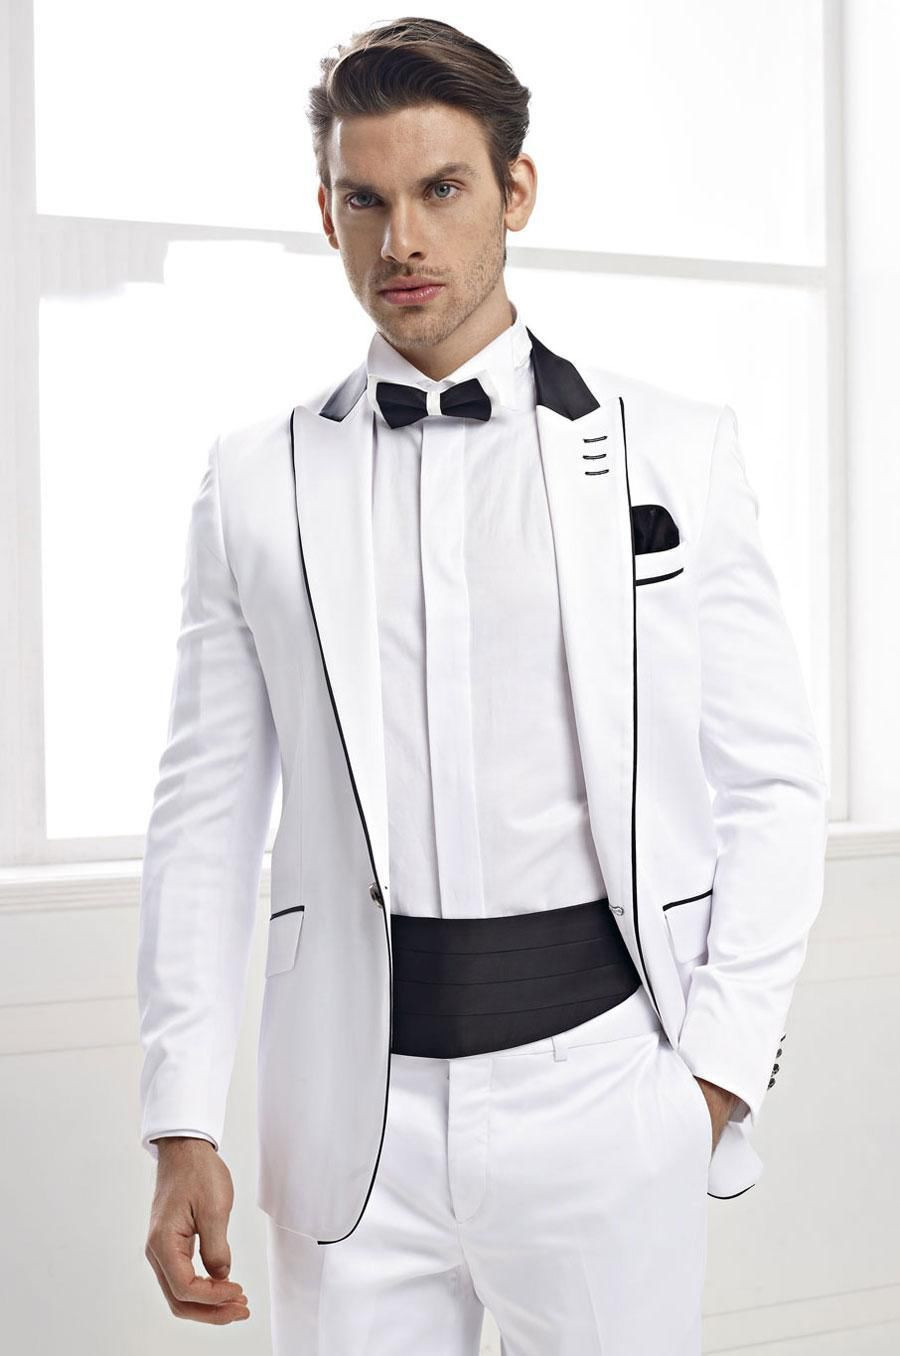 Custom Made Groommen Suit Tuxedos For Men Business Suits Formal Occasion Jacket+pants+waist Sealing Groom Wedding Suits